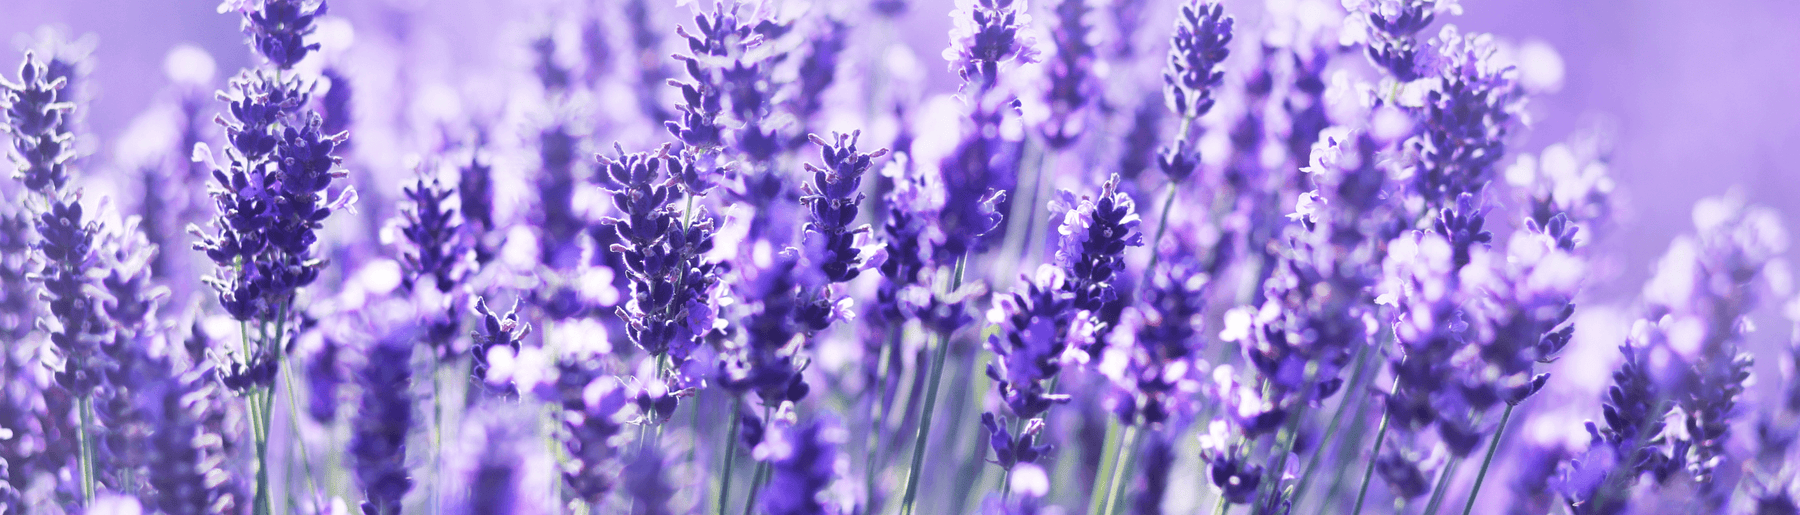 The therapeutic properties of lavender in history and culture